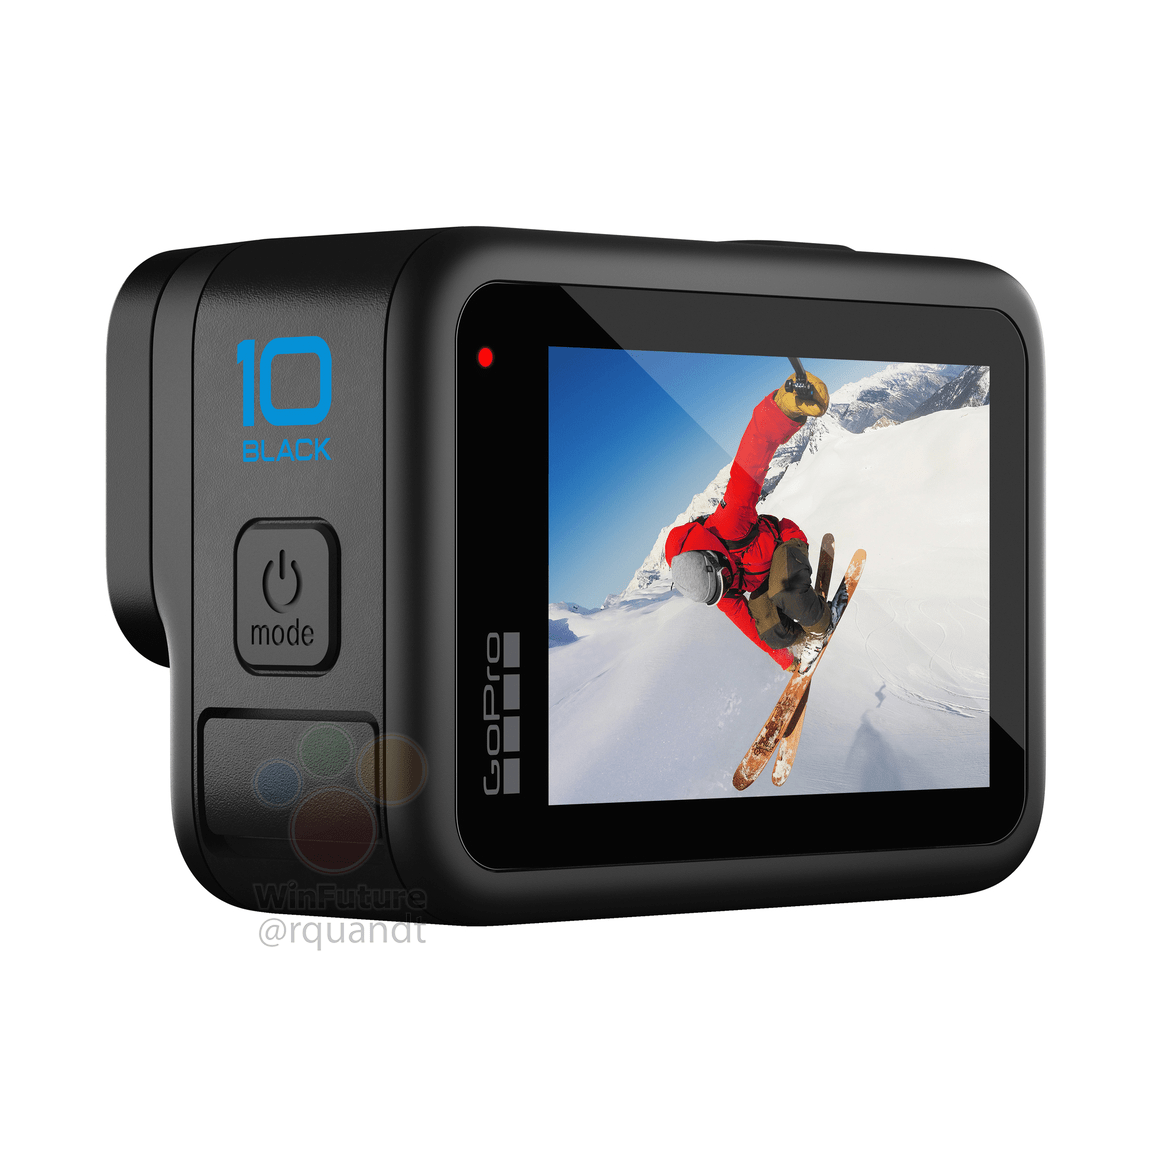 GoPro Hero 10 Black leaks with a new camera, processor and 